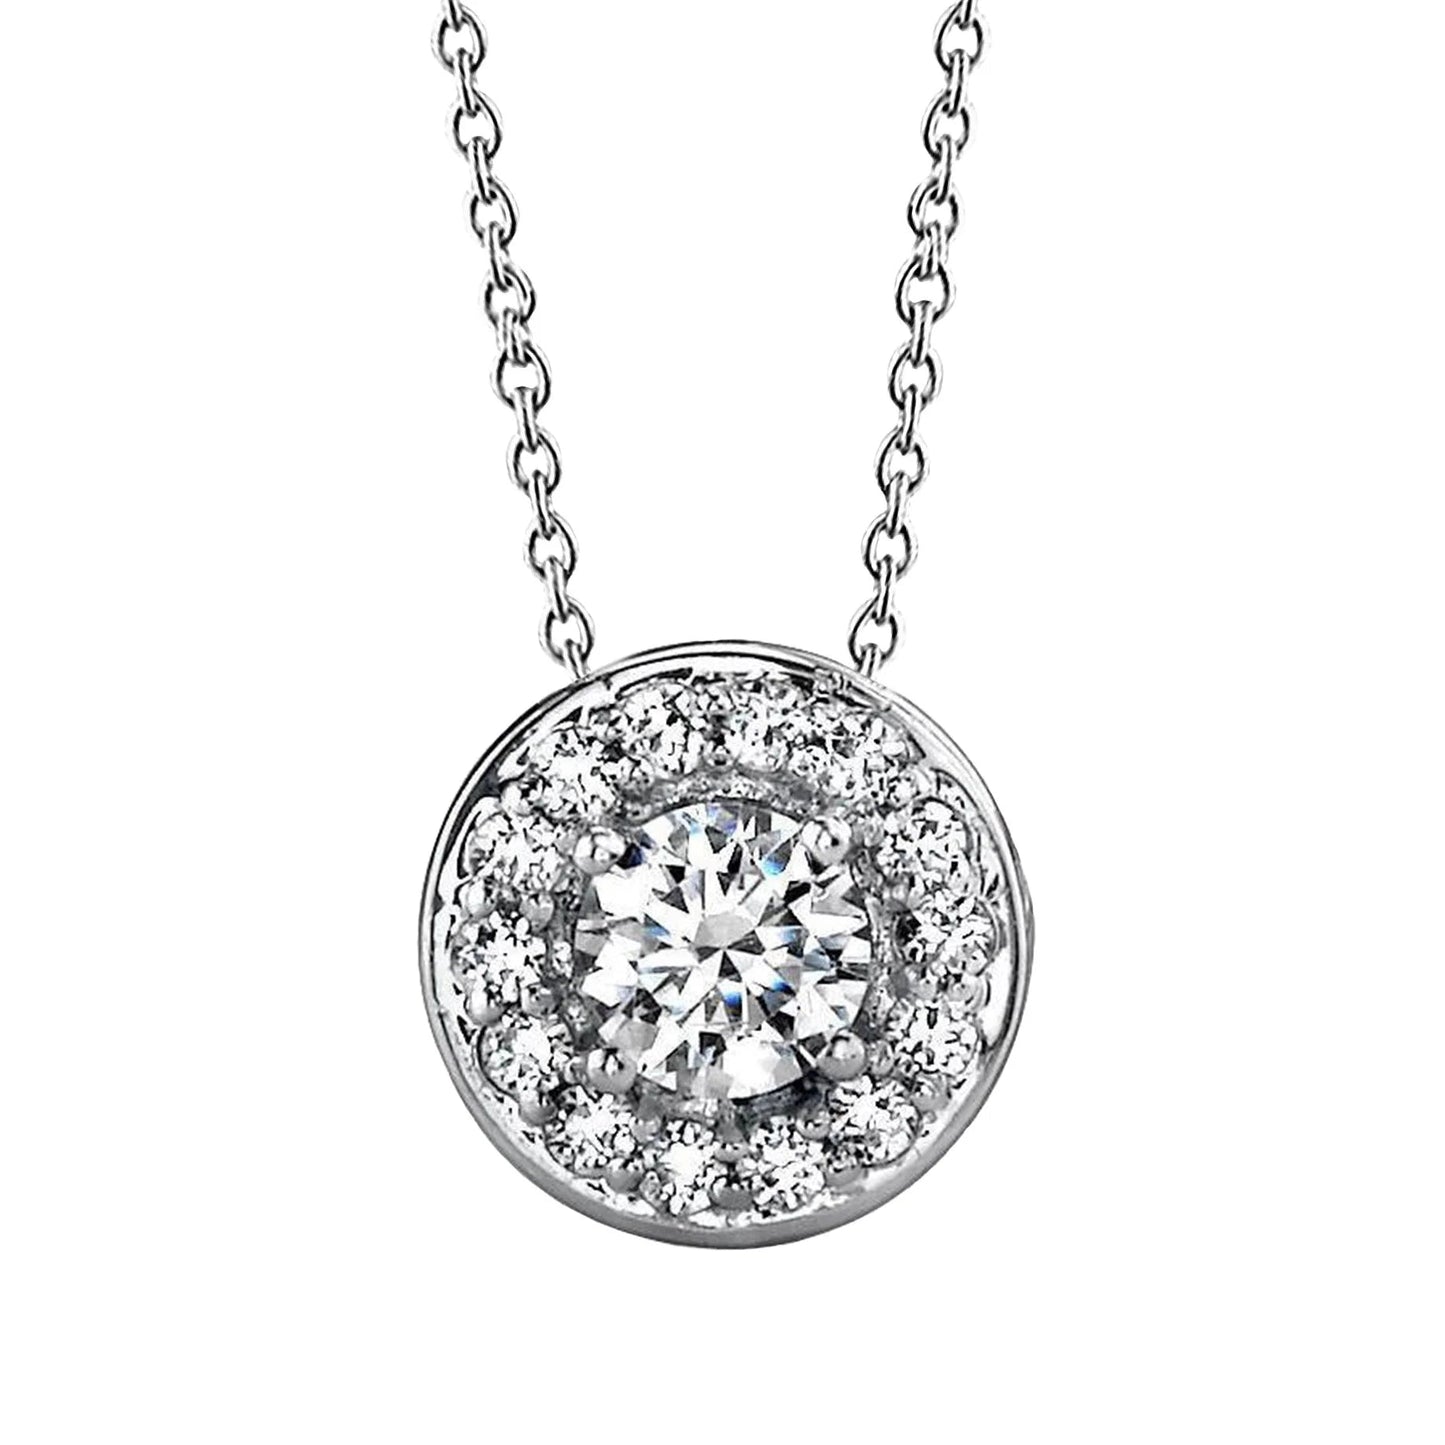 Pendant Necklace Sparkling 3 Carats Round Cut Real Diamonds Centered